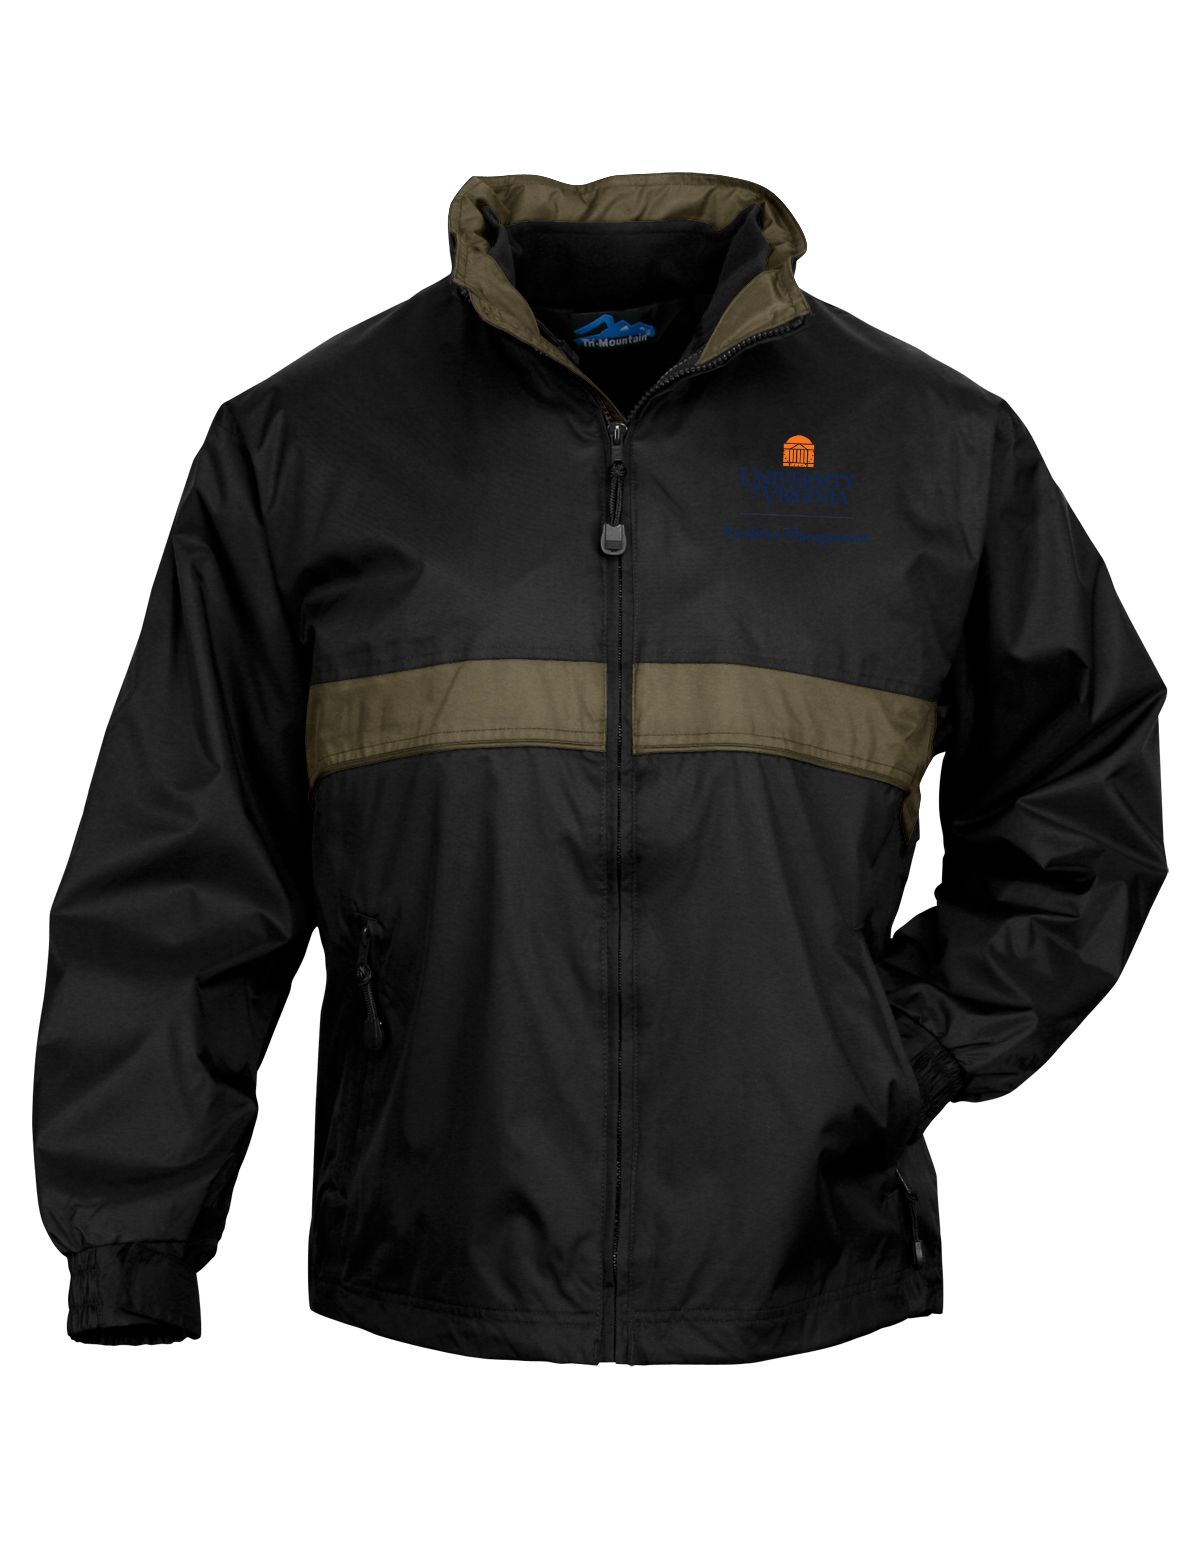 custom design of Tri-Mountain Performance 7950 - Connecticut three in one jacket